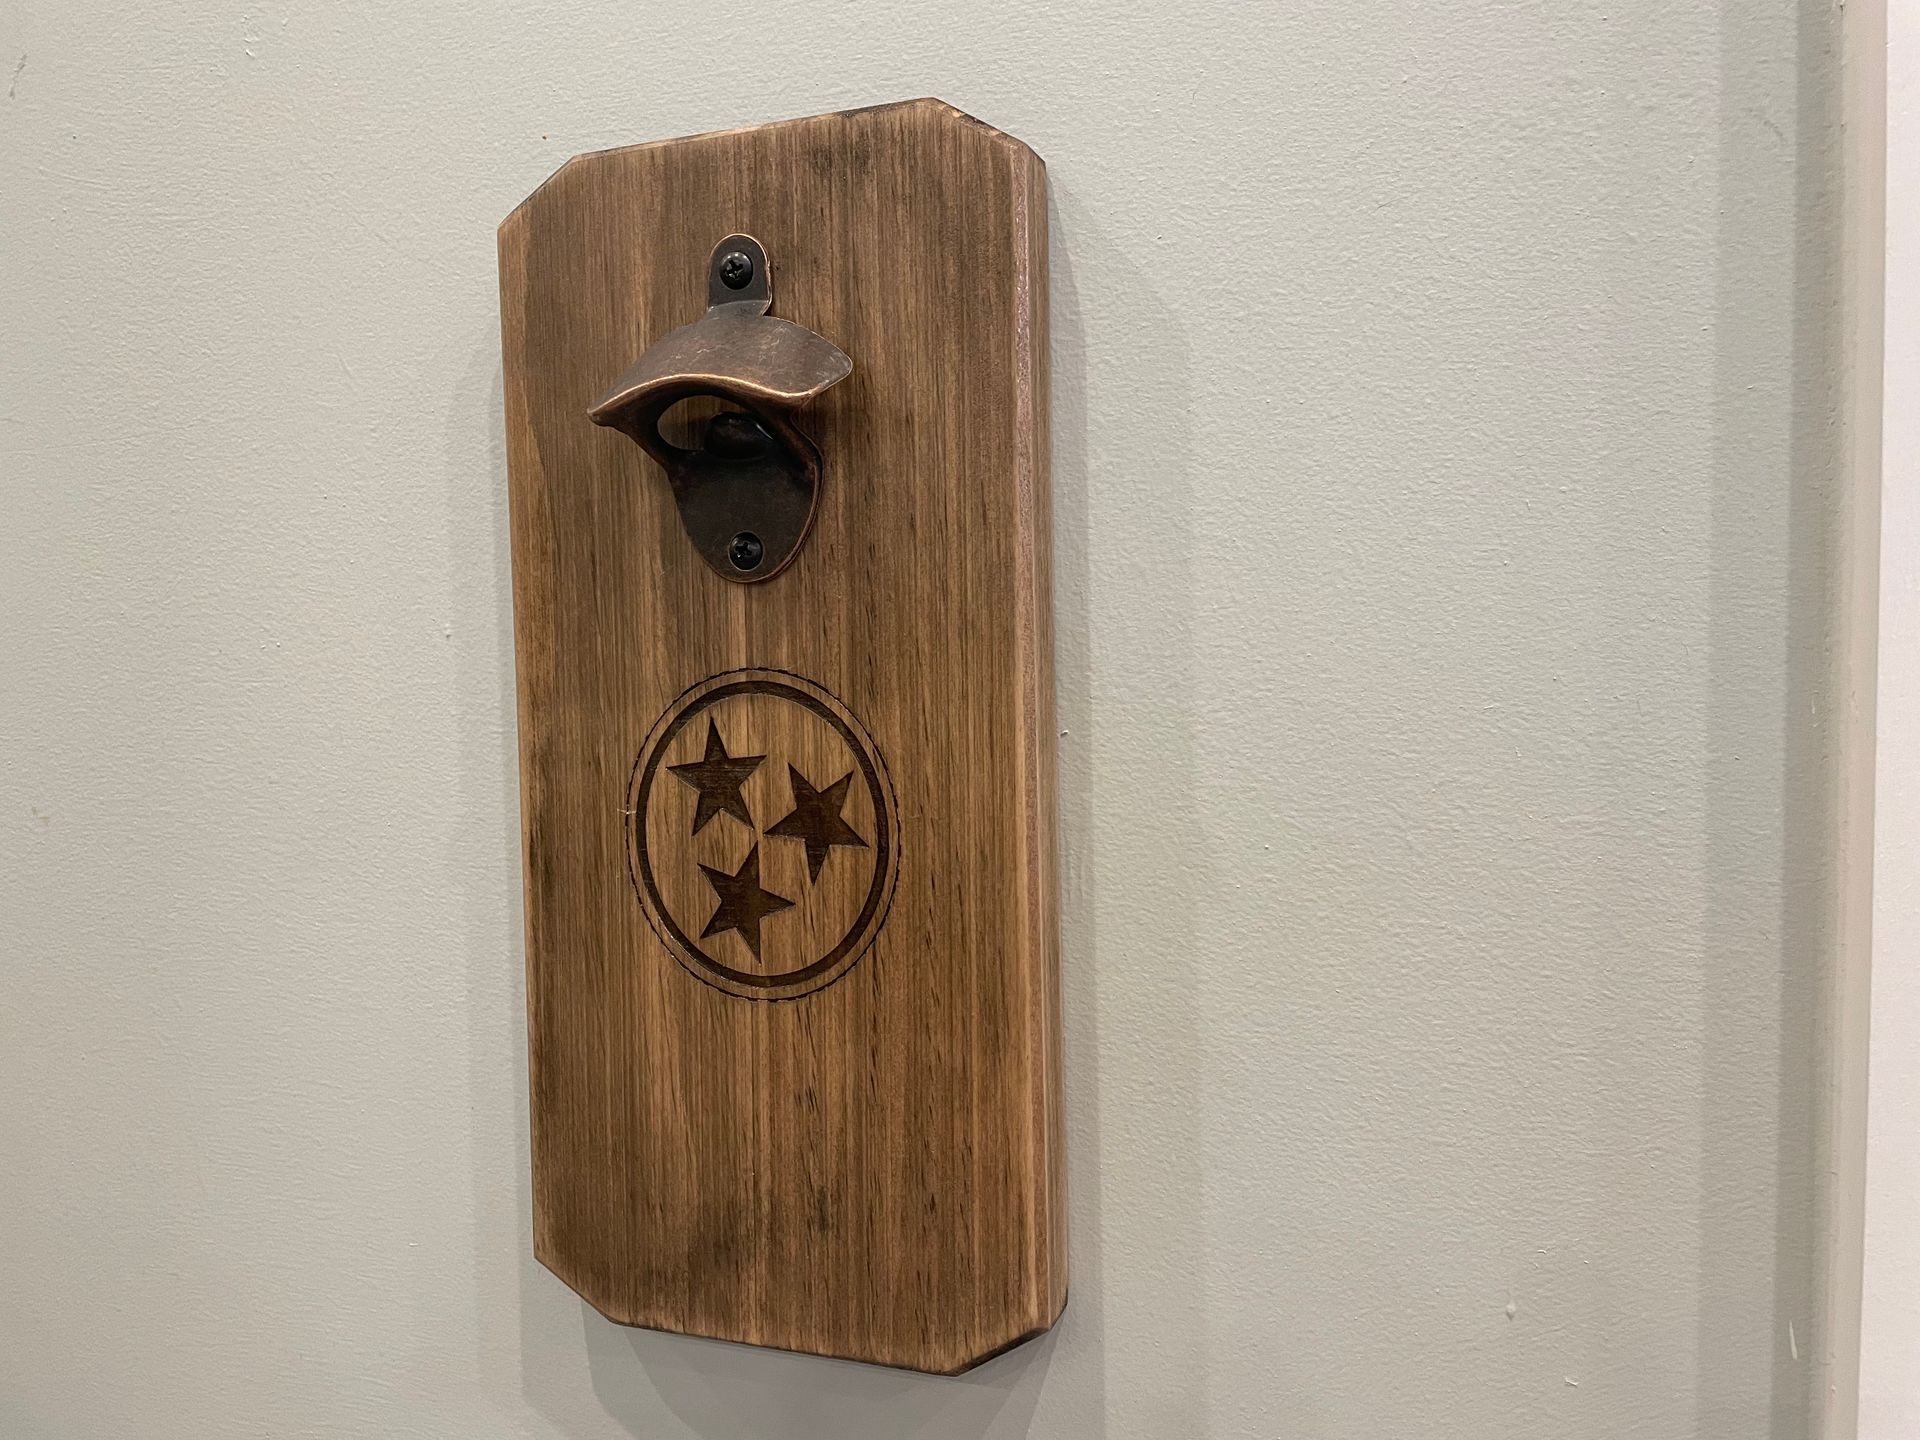 A wooden bottle opener is hanging on a wall.